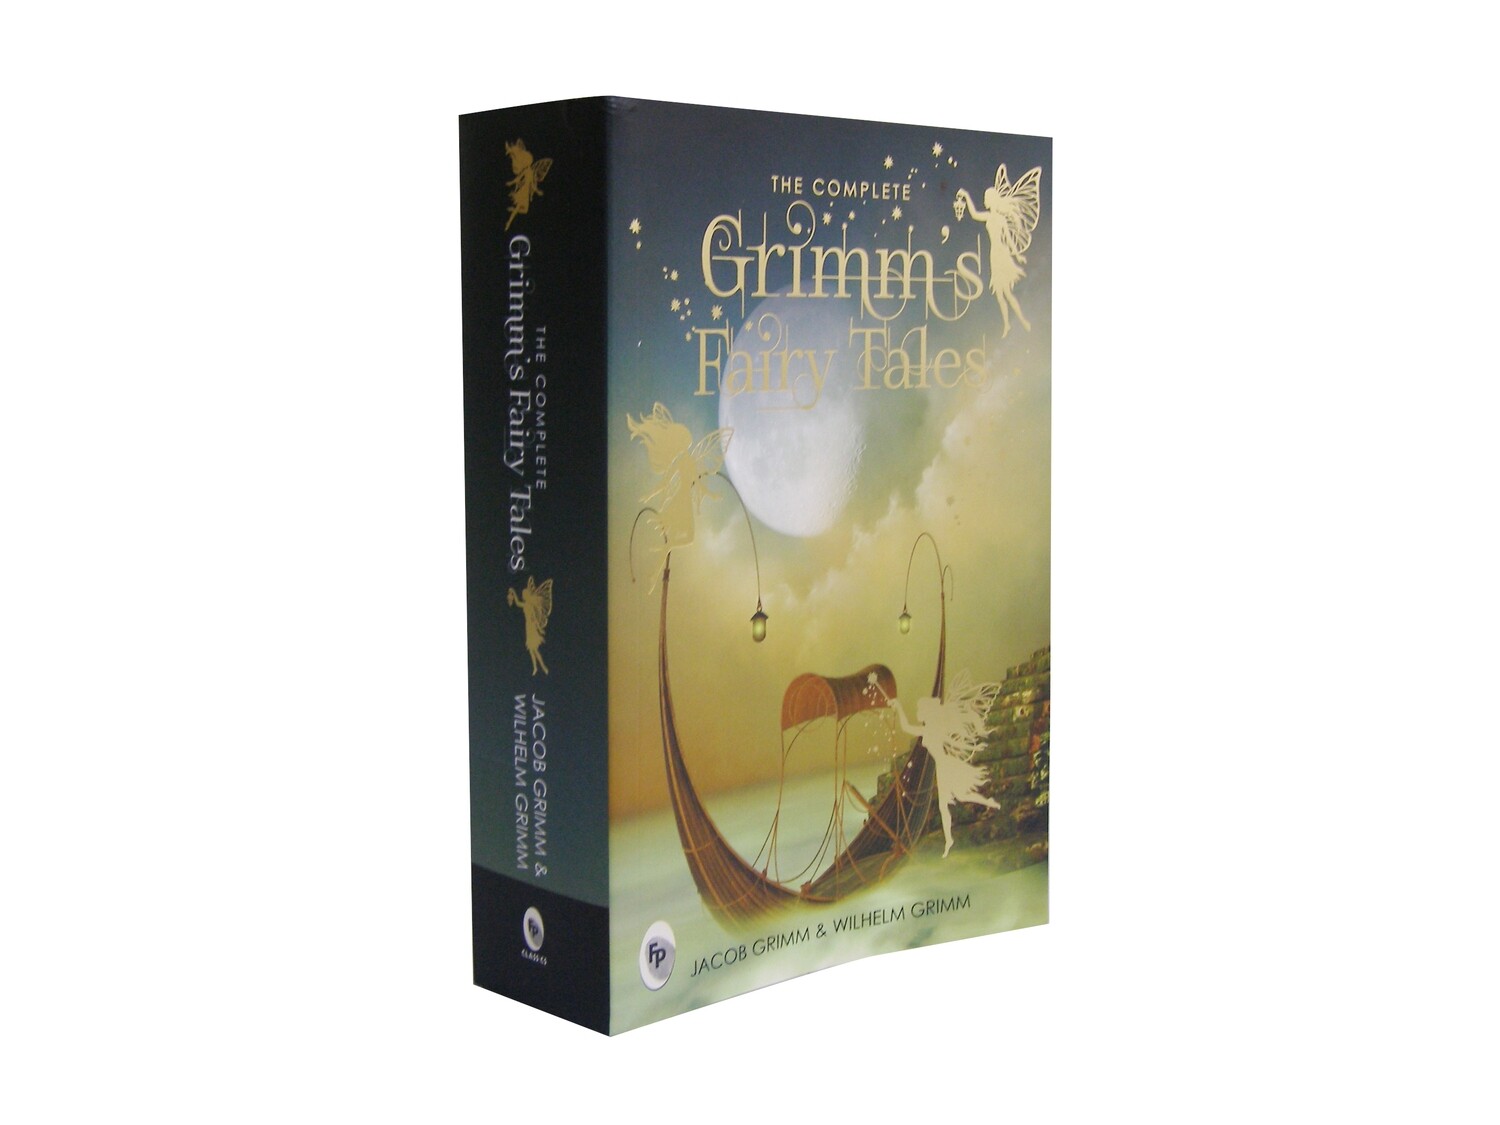 THE COMPLETE GRIMMS FAIRY TALES